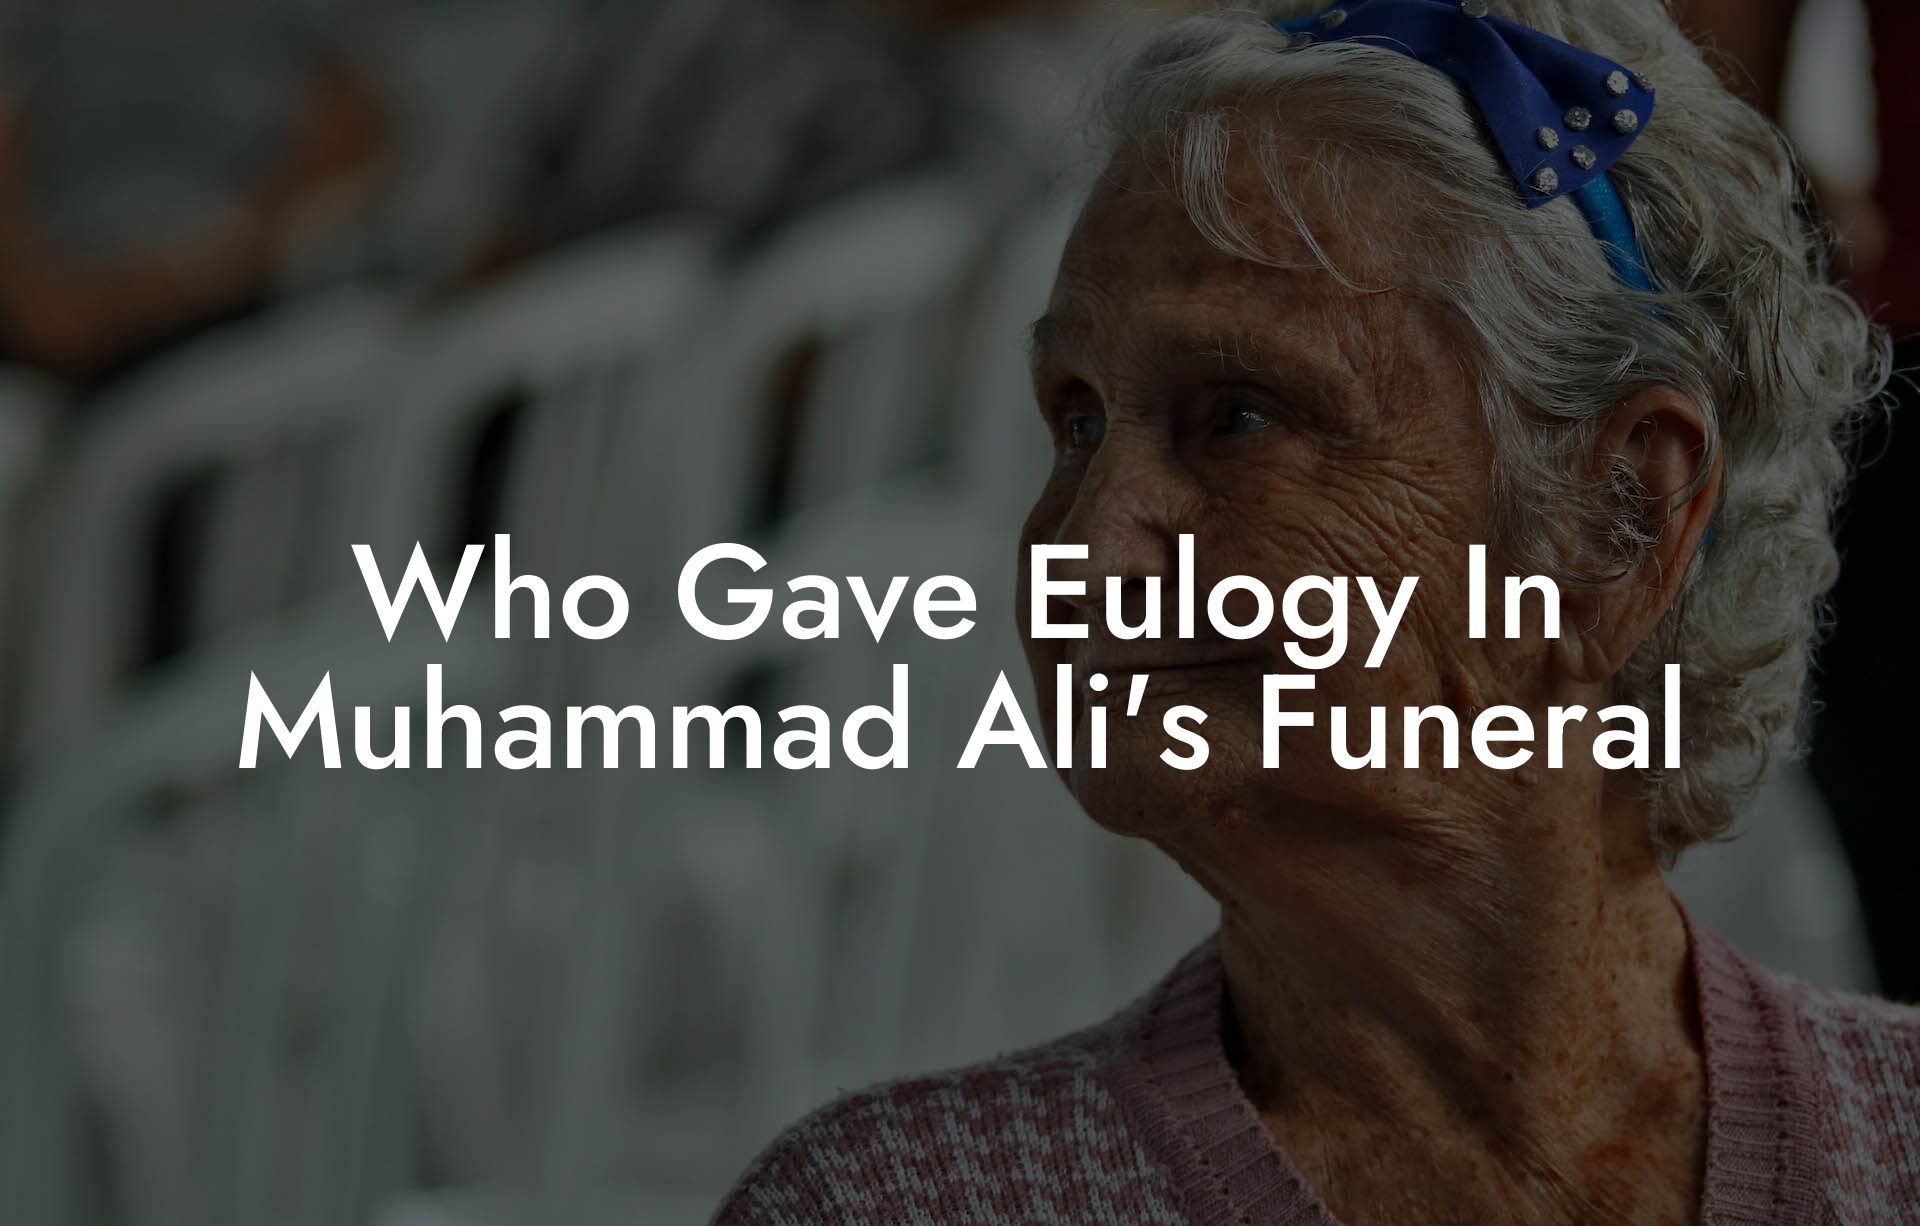 Who Gave Eulogy In Muhammad Ali's Funeral